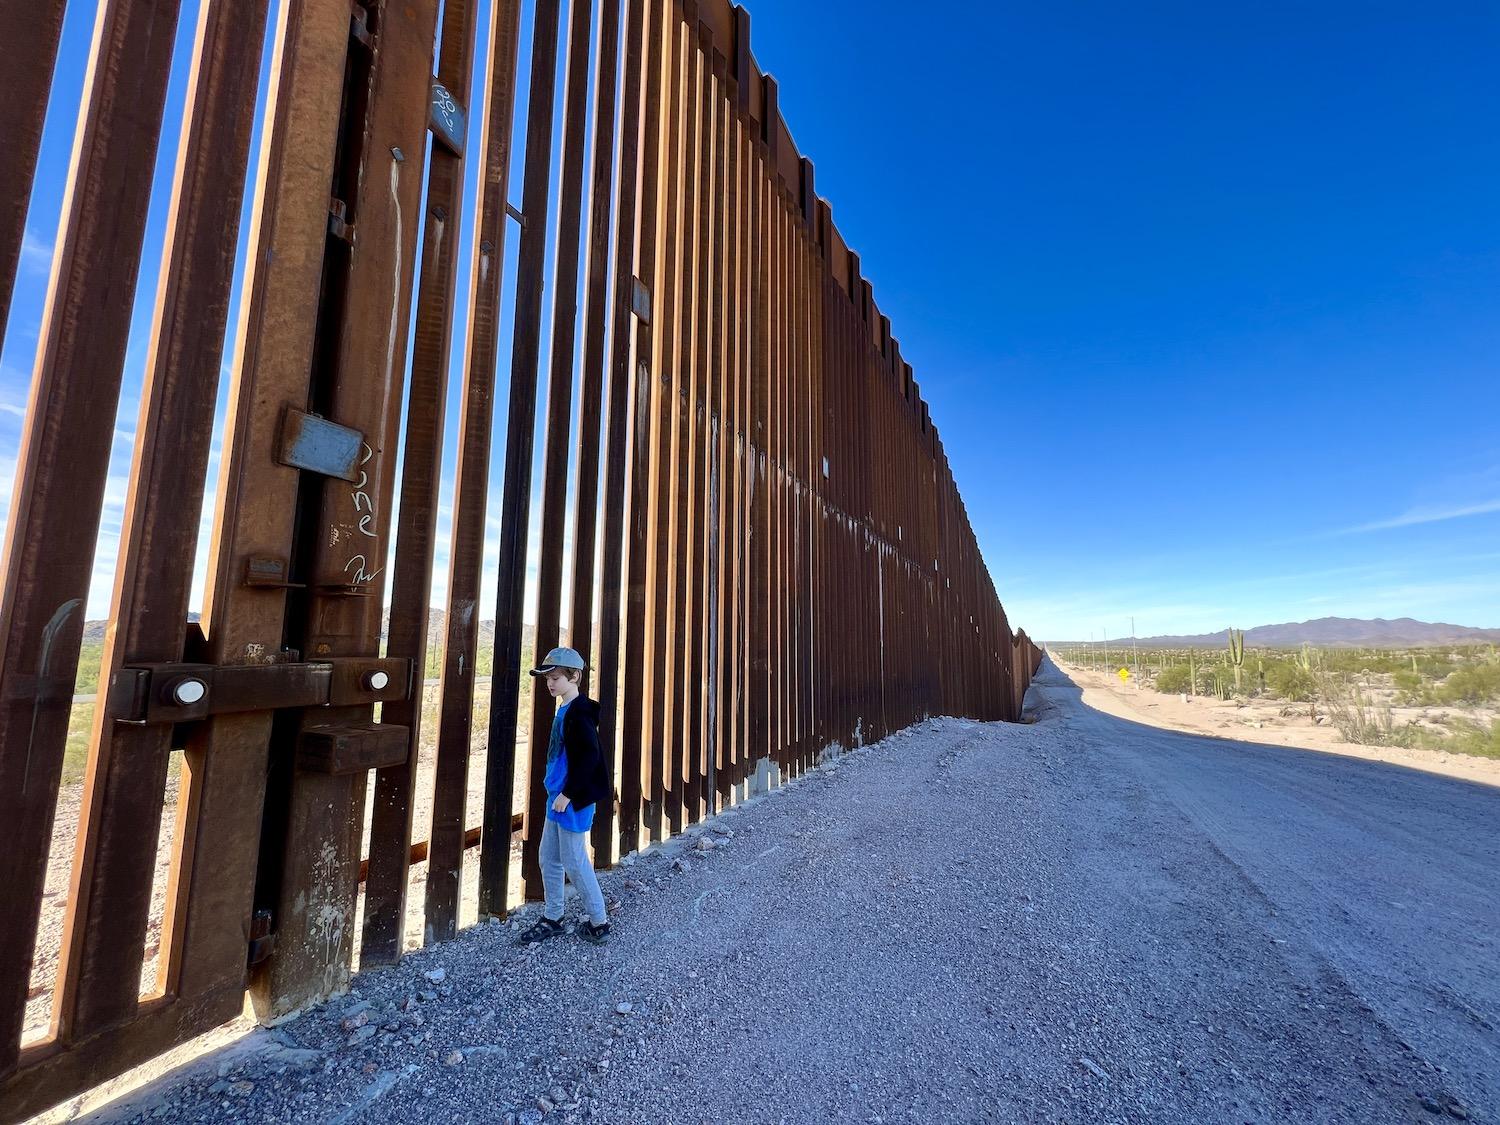 A 10-year-old boy is dwarfed by the Trump border wall in Organ Pipe Cactus National Monument in southwestern Arizona.